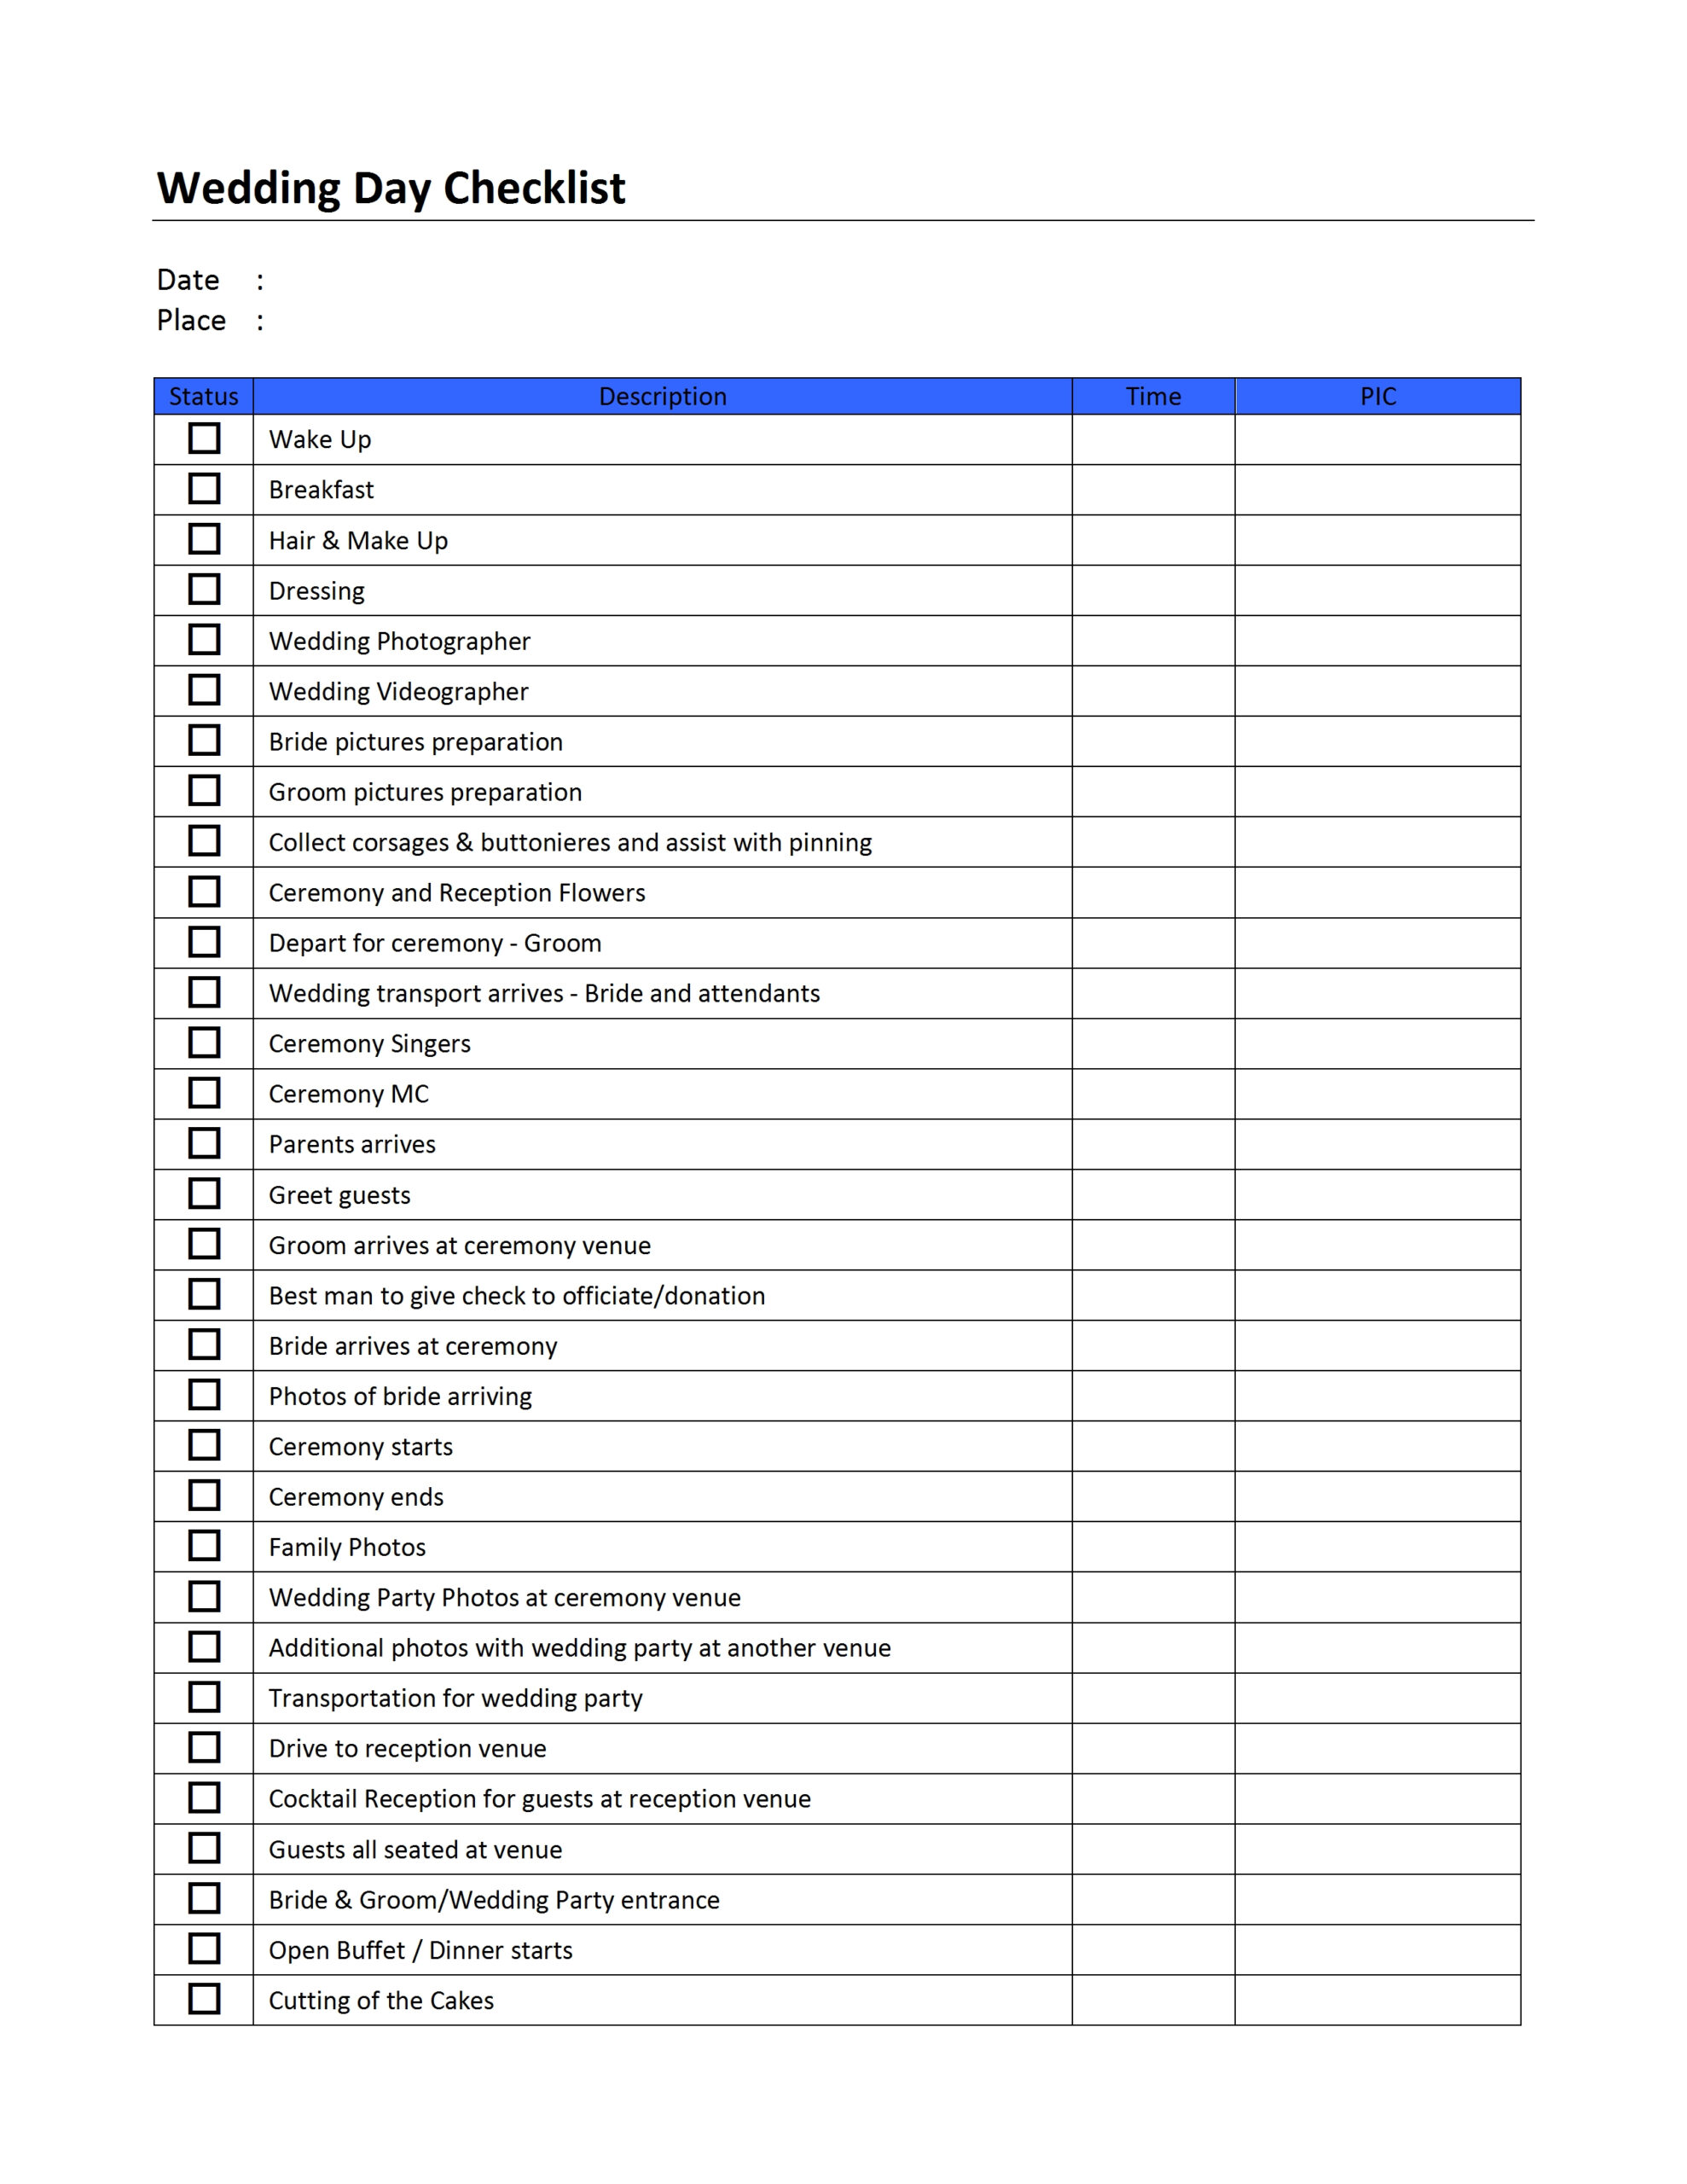 Blank Checklist Template Word 2010 | Administrative Intended For Blank Checklist Template Word